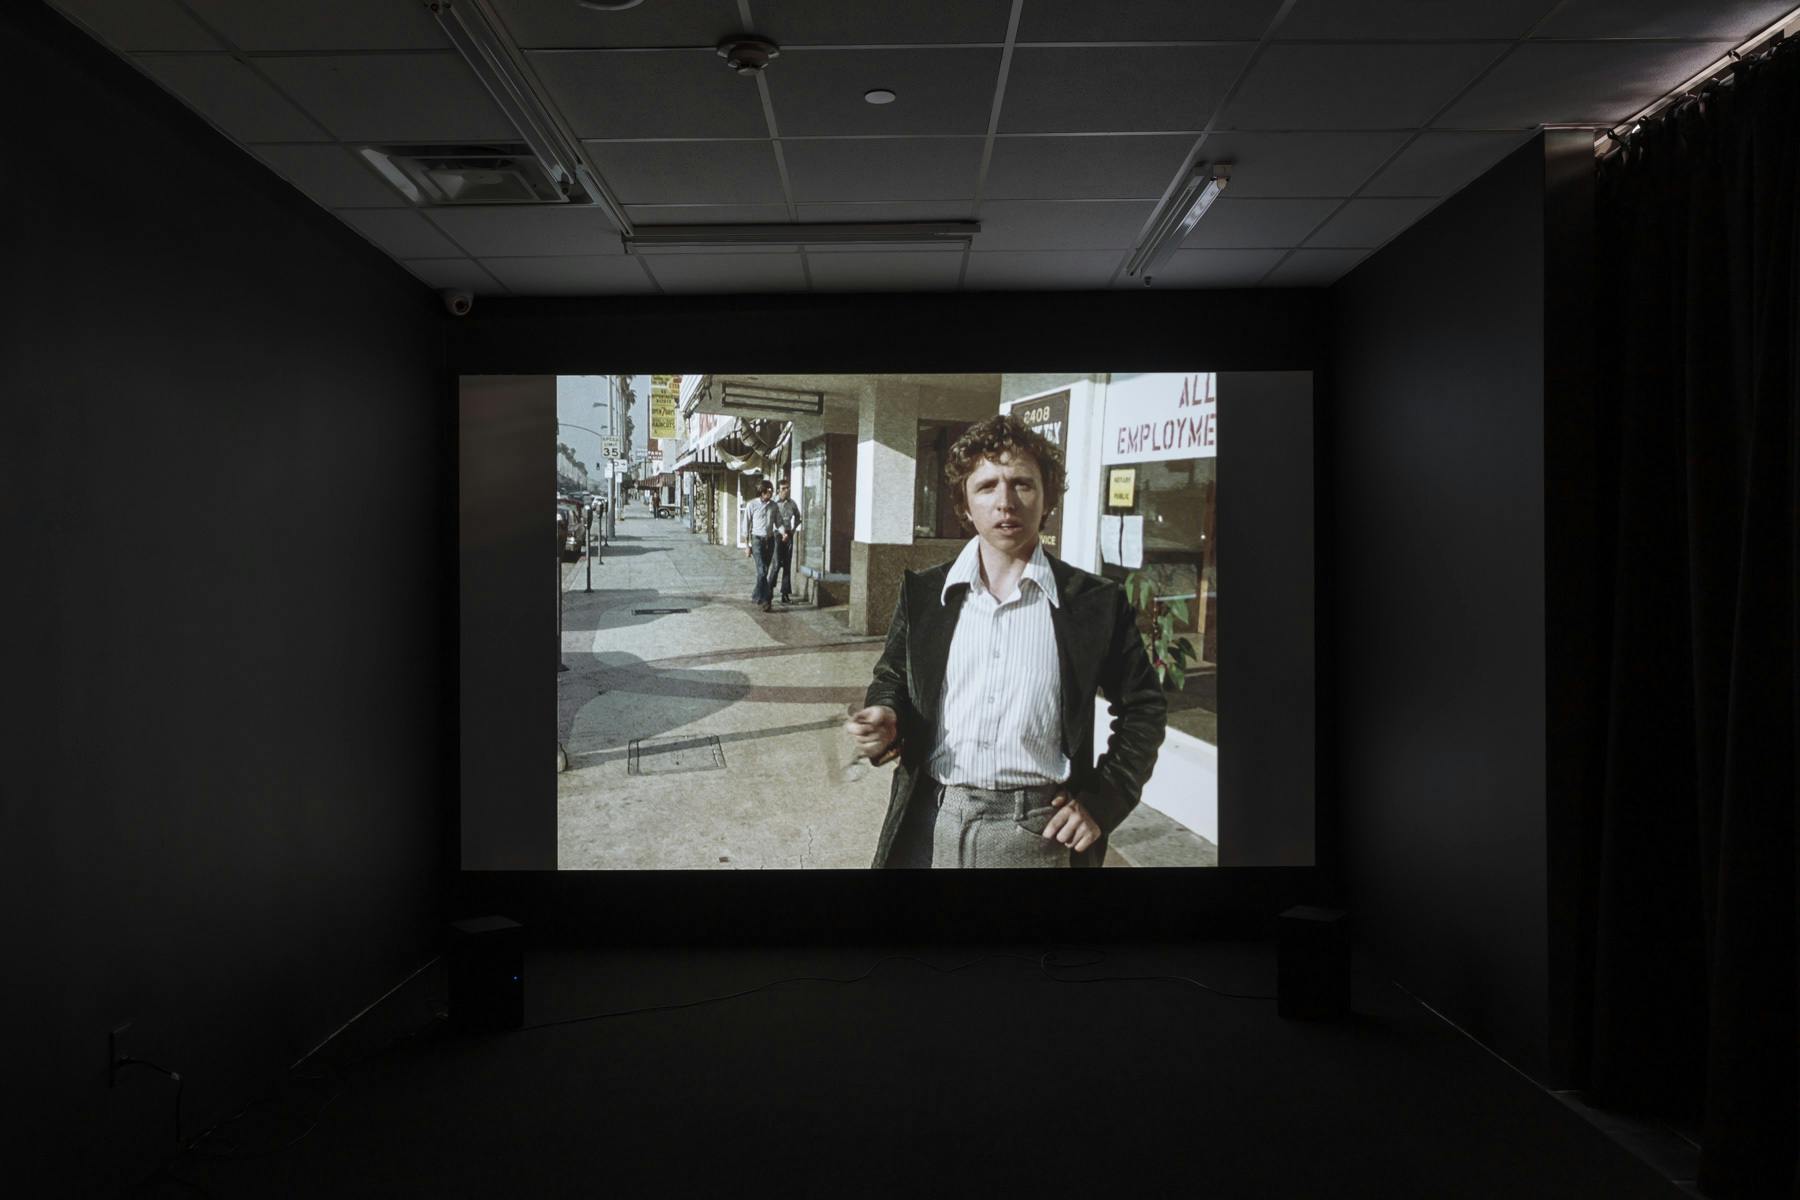 Installation view of a video projection in a dark room.